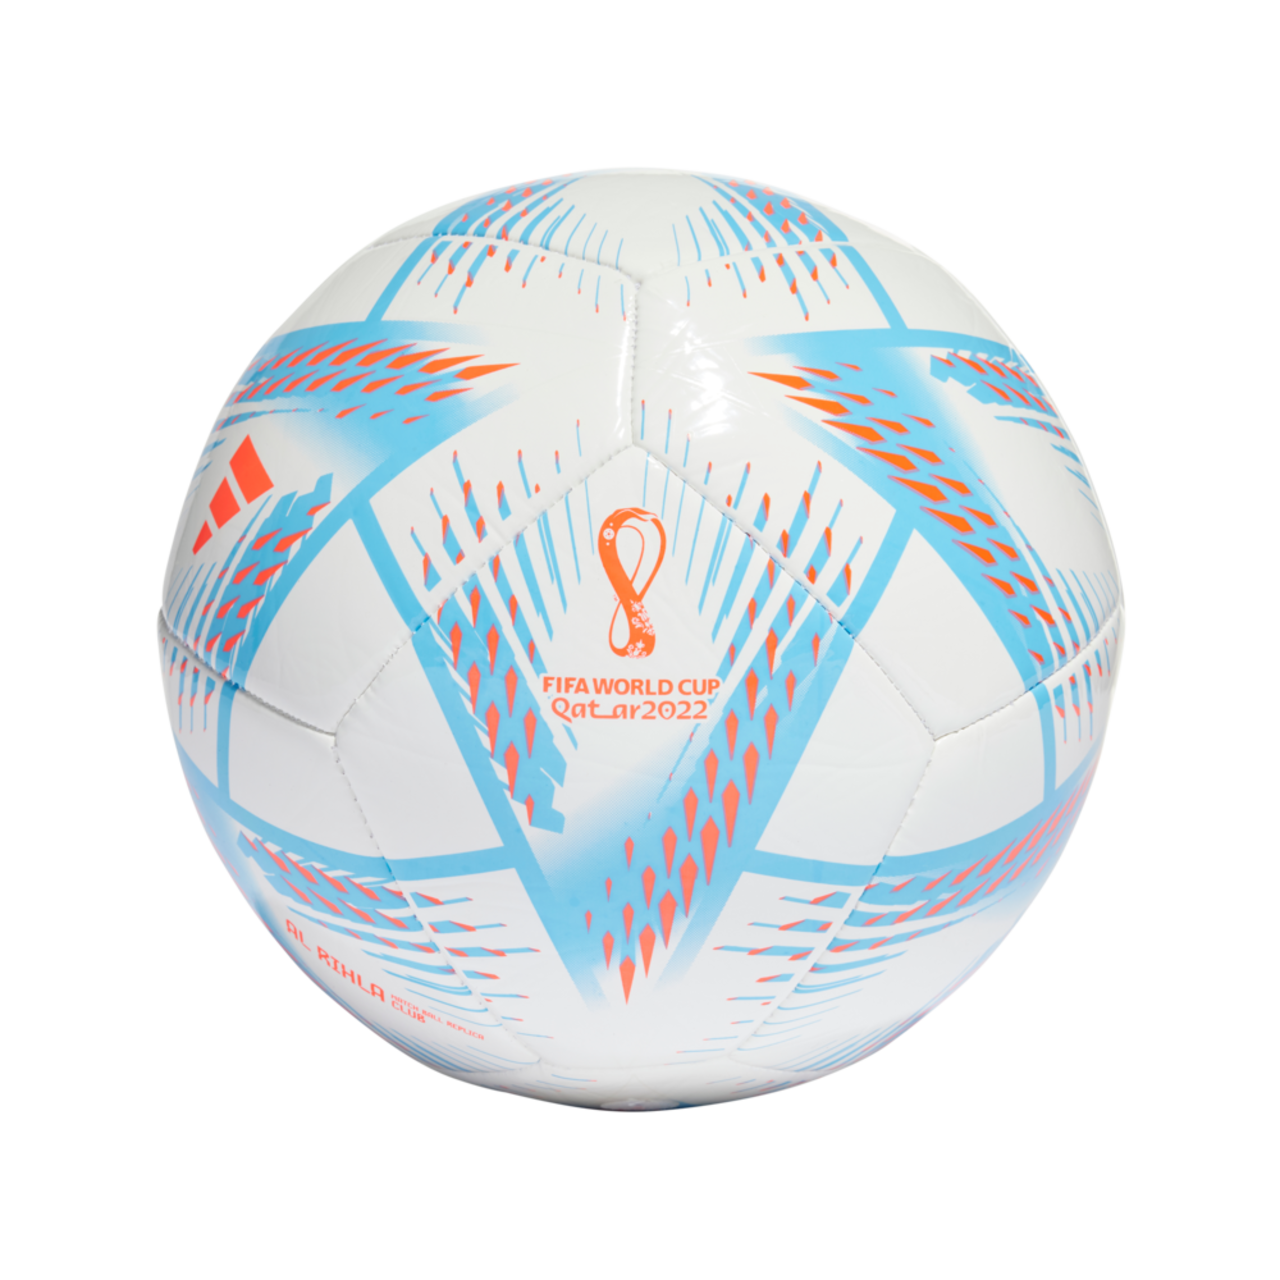 https://media-www.canadiantire.ca/product/playing/team-sports-and-golf/field-sports/1841129/adidas-world-cup-22-soccer-ball-size-5-b290321b-1231-49f0-81b3-d55b4b08aba9.png?imdensity=1&imwidth=1244&impolicy=mZoom